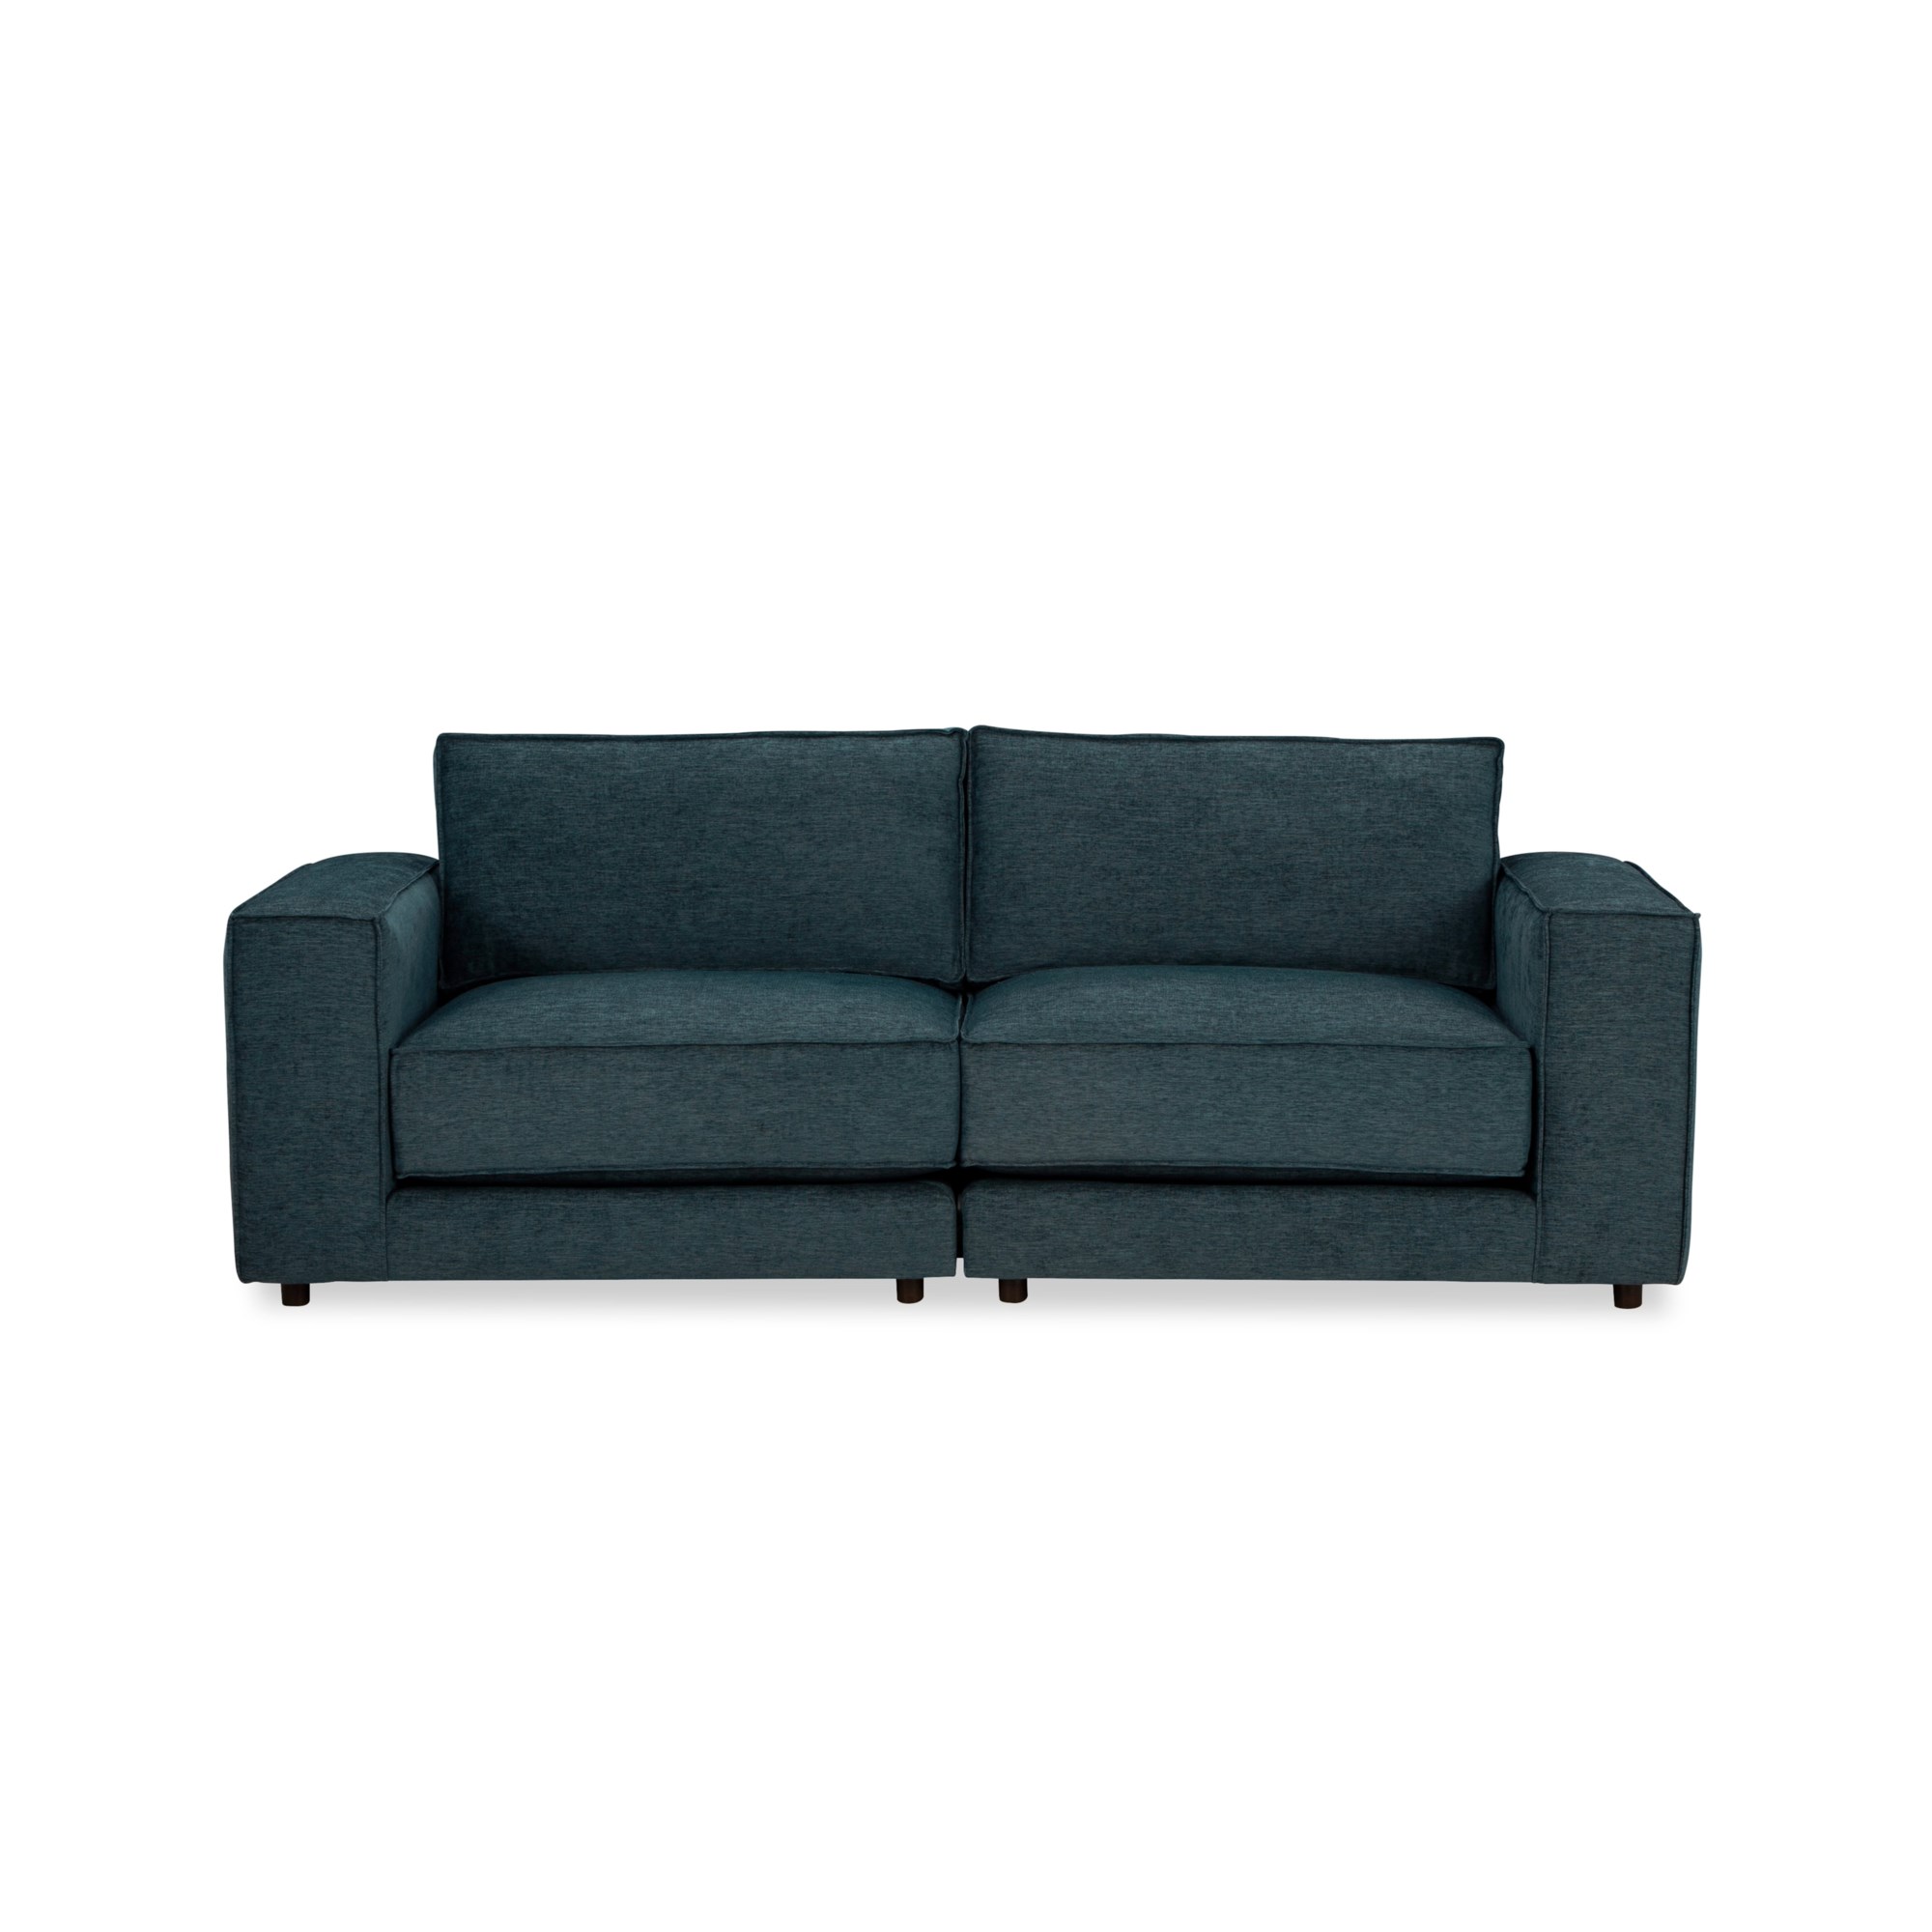 Furniture Uph Sofas Sofa Stationary - with 734801BD Collections | Seats | Home 2 Craftmaster Contemporary 734819BDx1+734818BDx1 ROBBIE-23 Modular